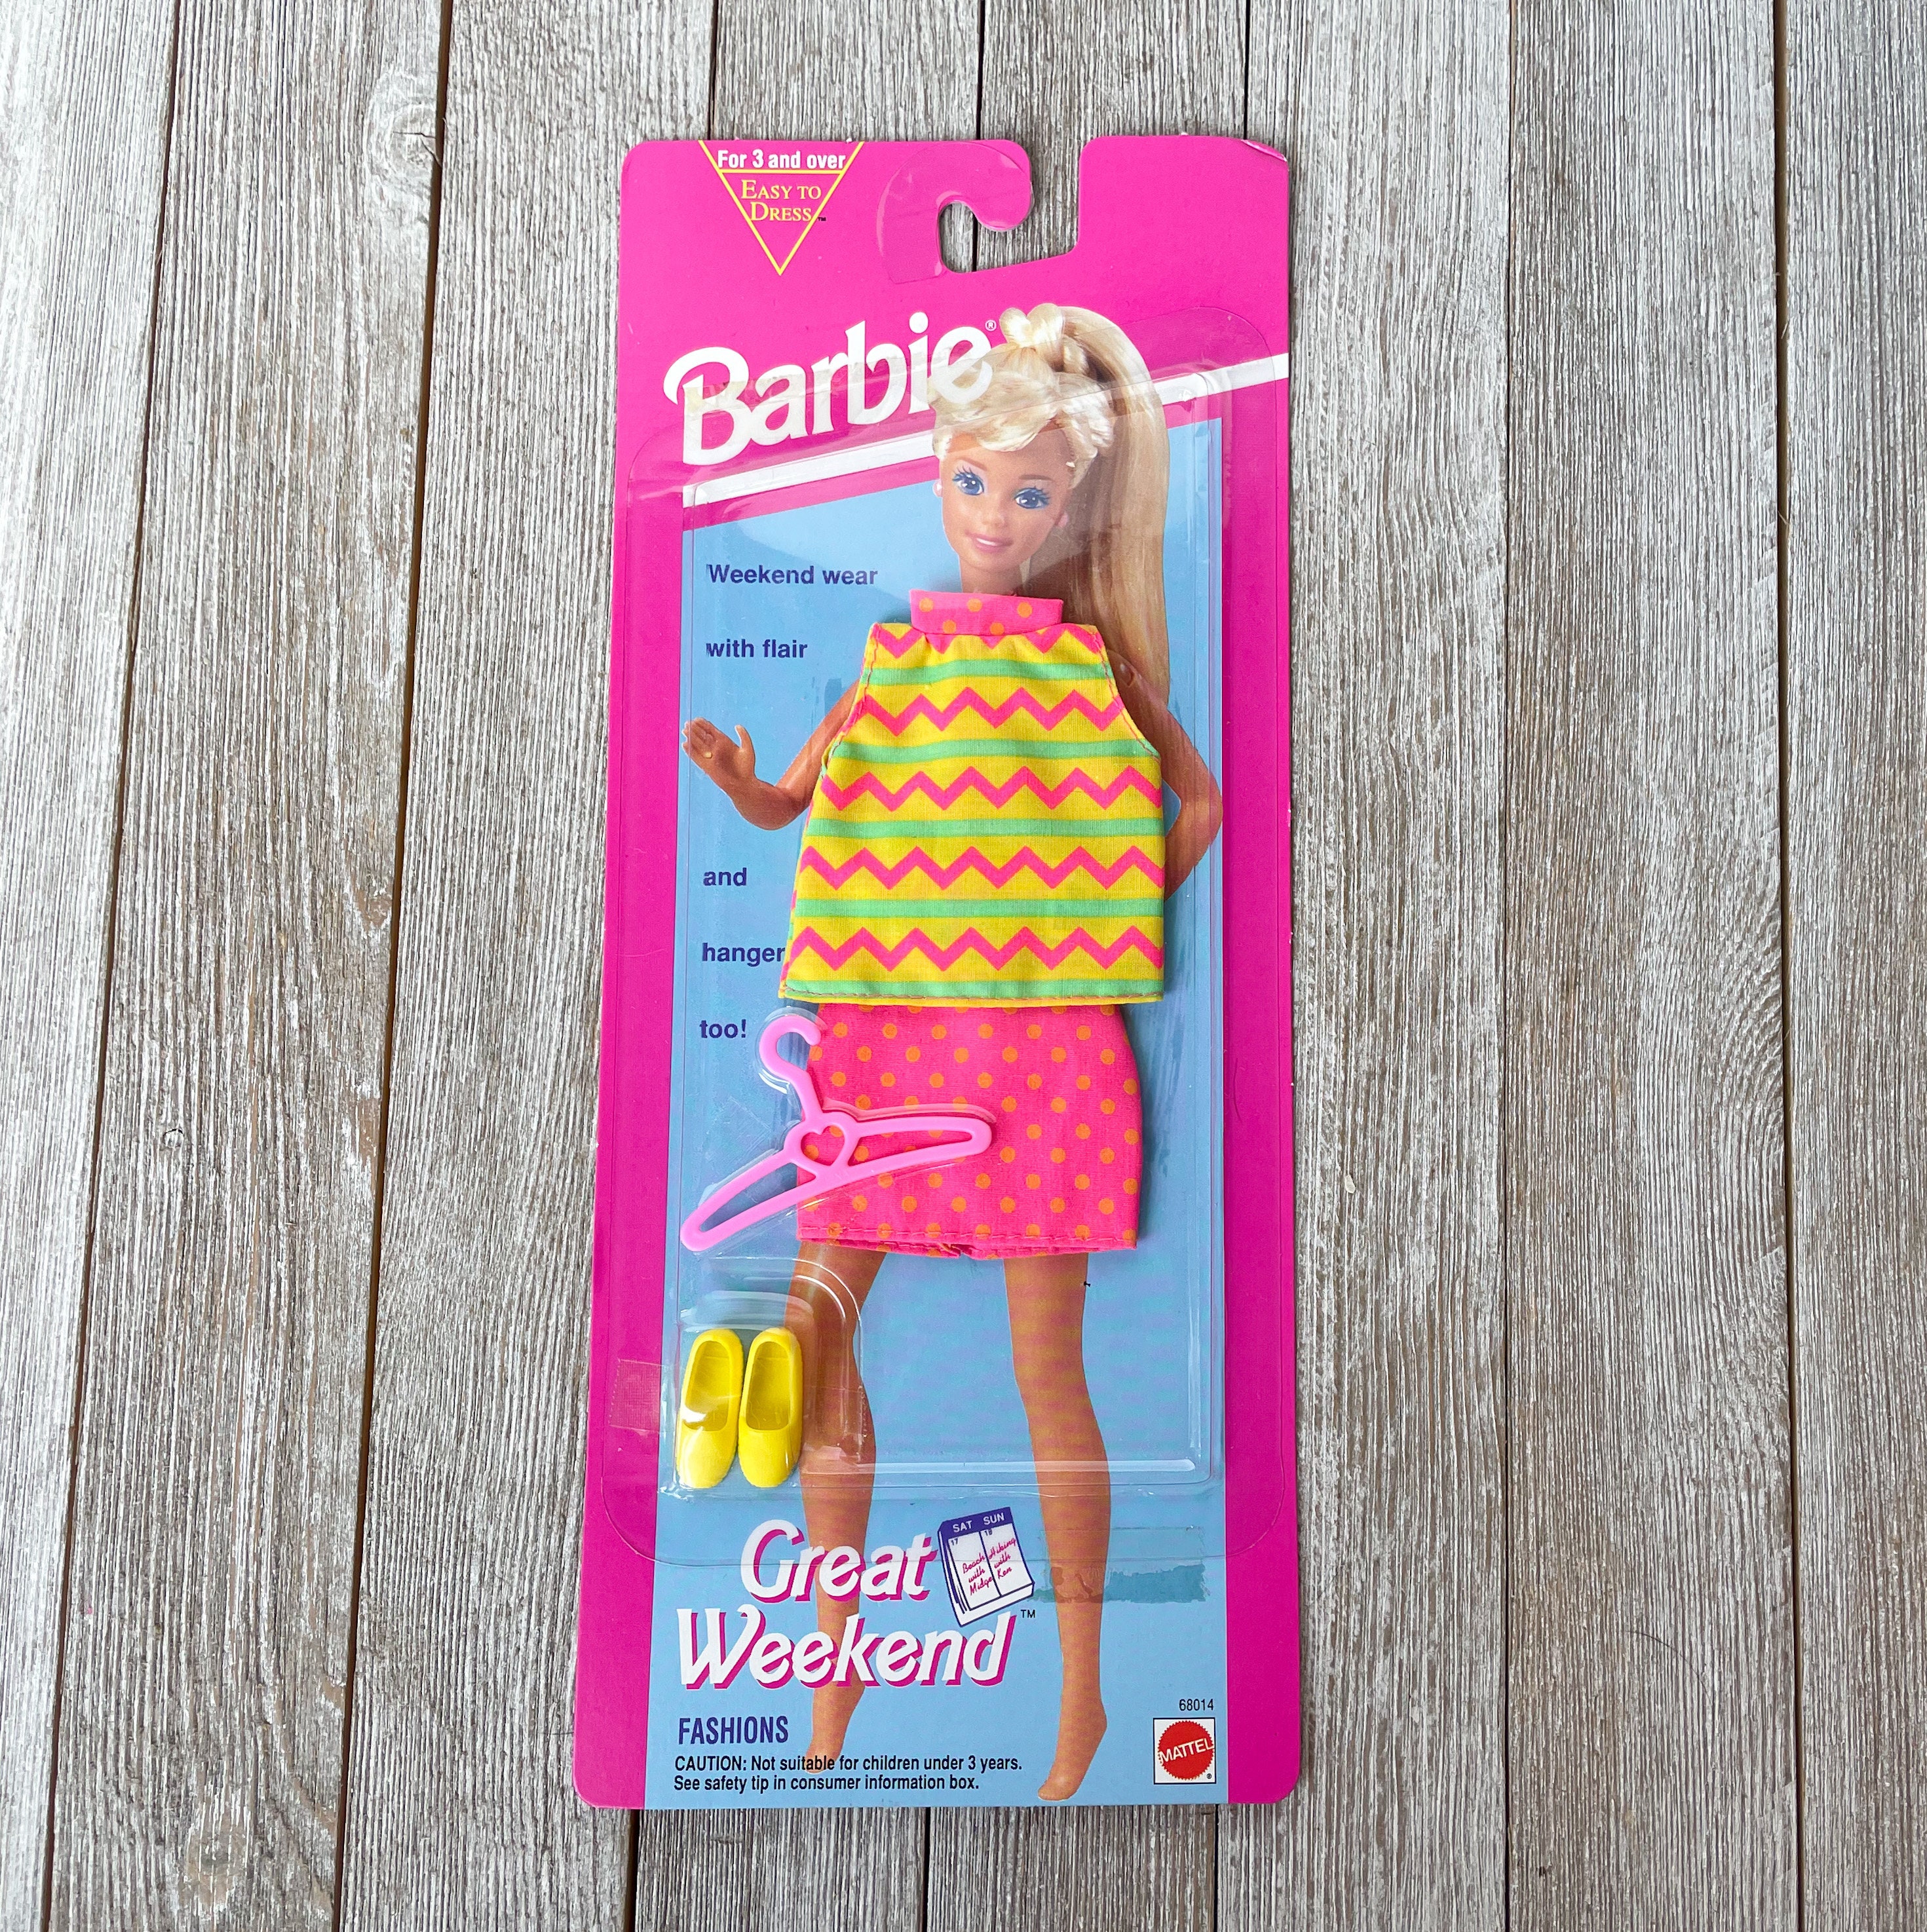 Fryse Supersonic hastighed Snuble Barbie Weekend Wear Great Weekend Outfit New in Package - Etsy